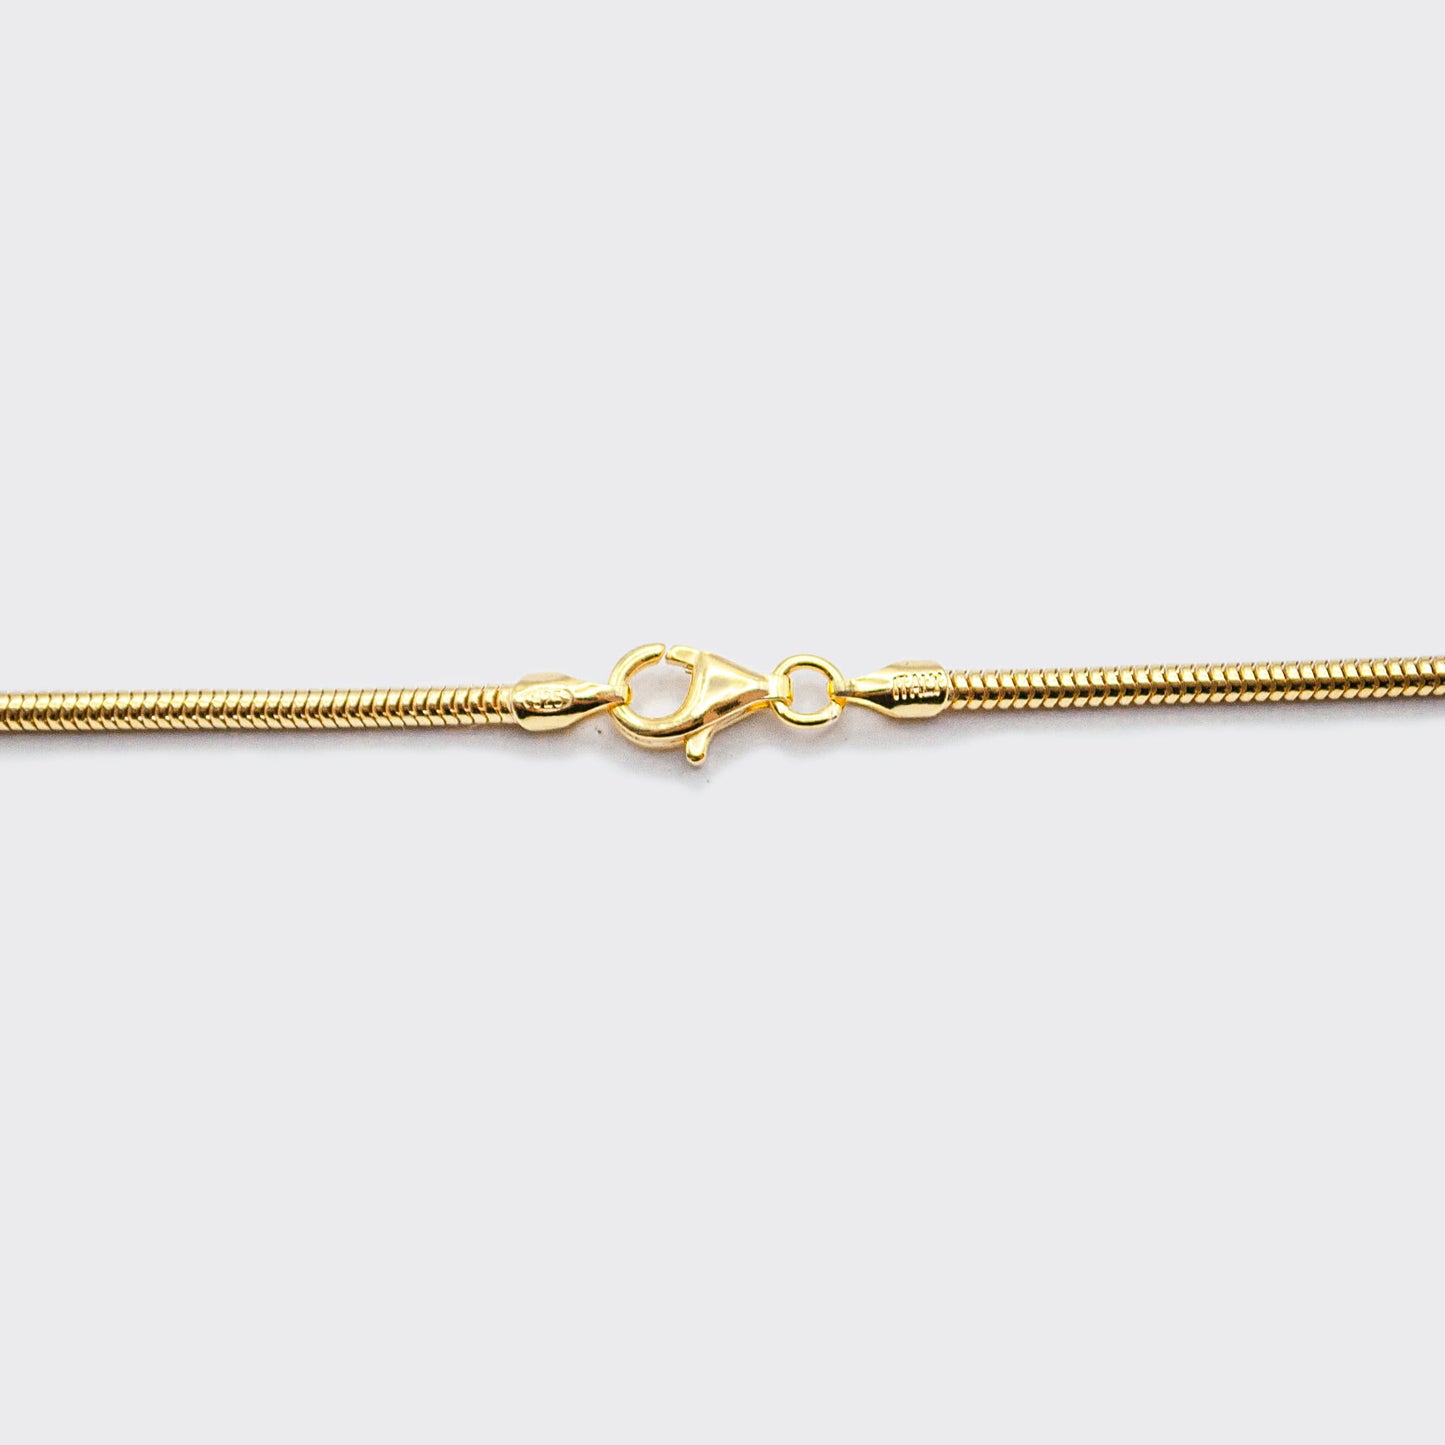 The Mamba necklace is made of 925 sterling silver, covered with 18K gold. The chain is handcrafted in Italy and made for both men and women.